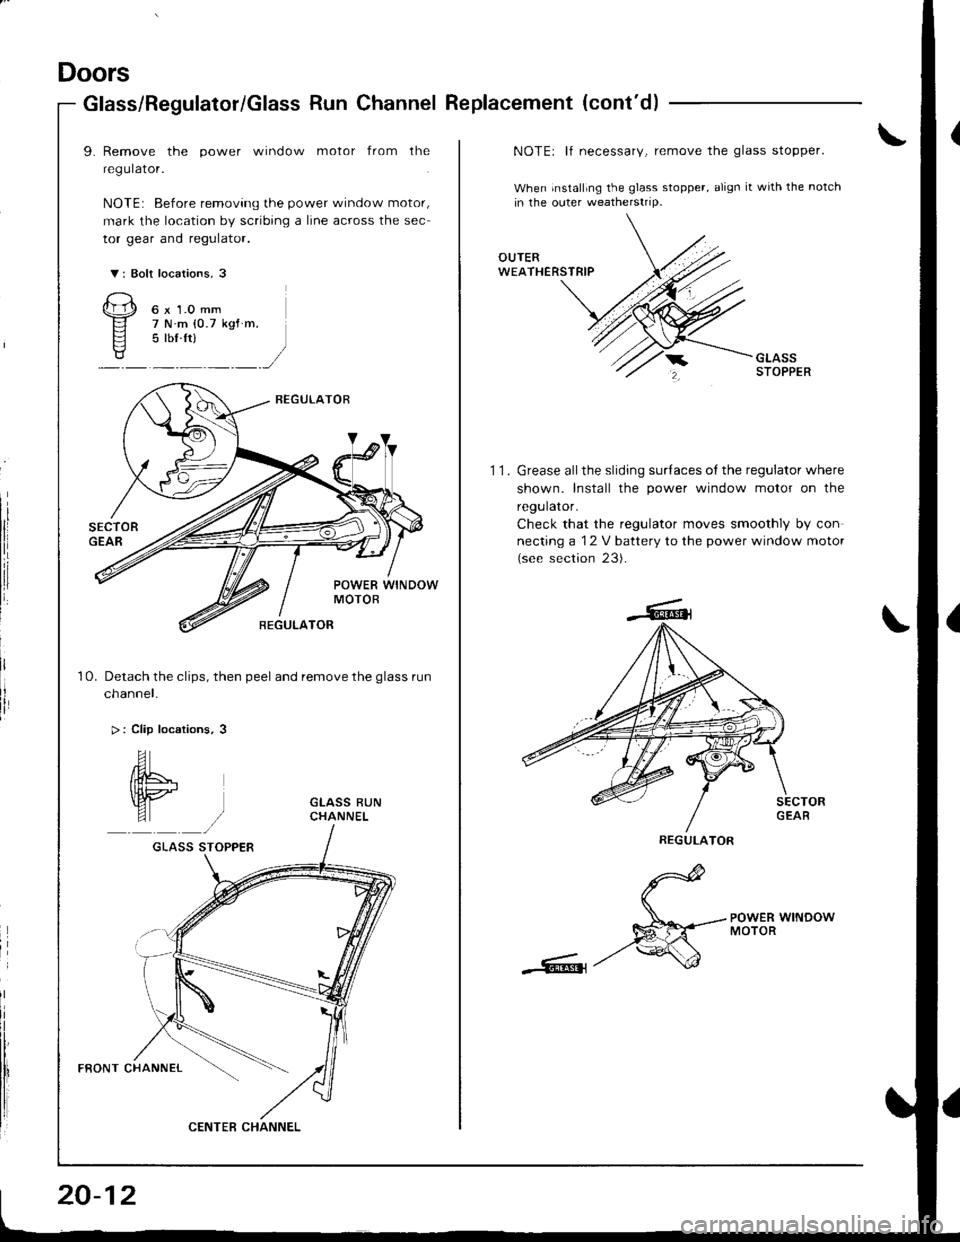 HONDA INTEGRA 1998 4.G Workshop Manual Doors
Glass/Regulator/Glass Run Channel Replacement (contd)
9. Remove the power window motor from the
regulator.
NOTE: Before removing the power window motor,
mark the location by scribing a line acr